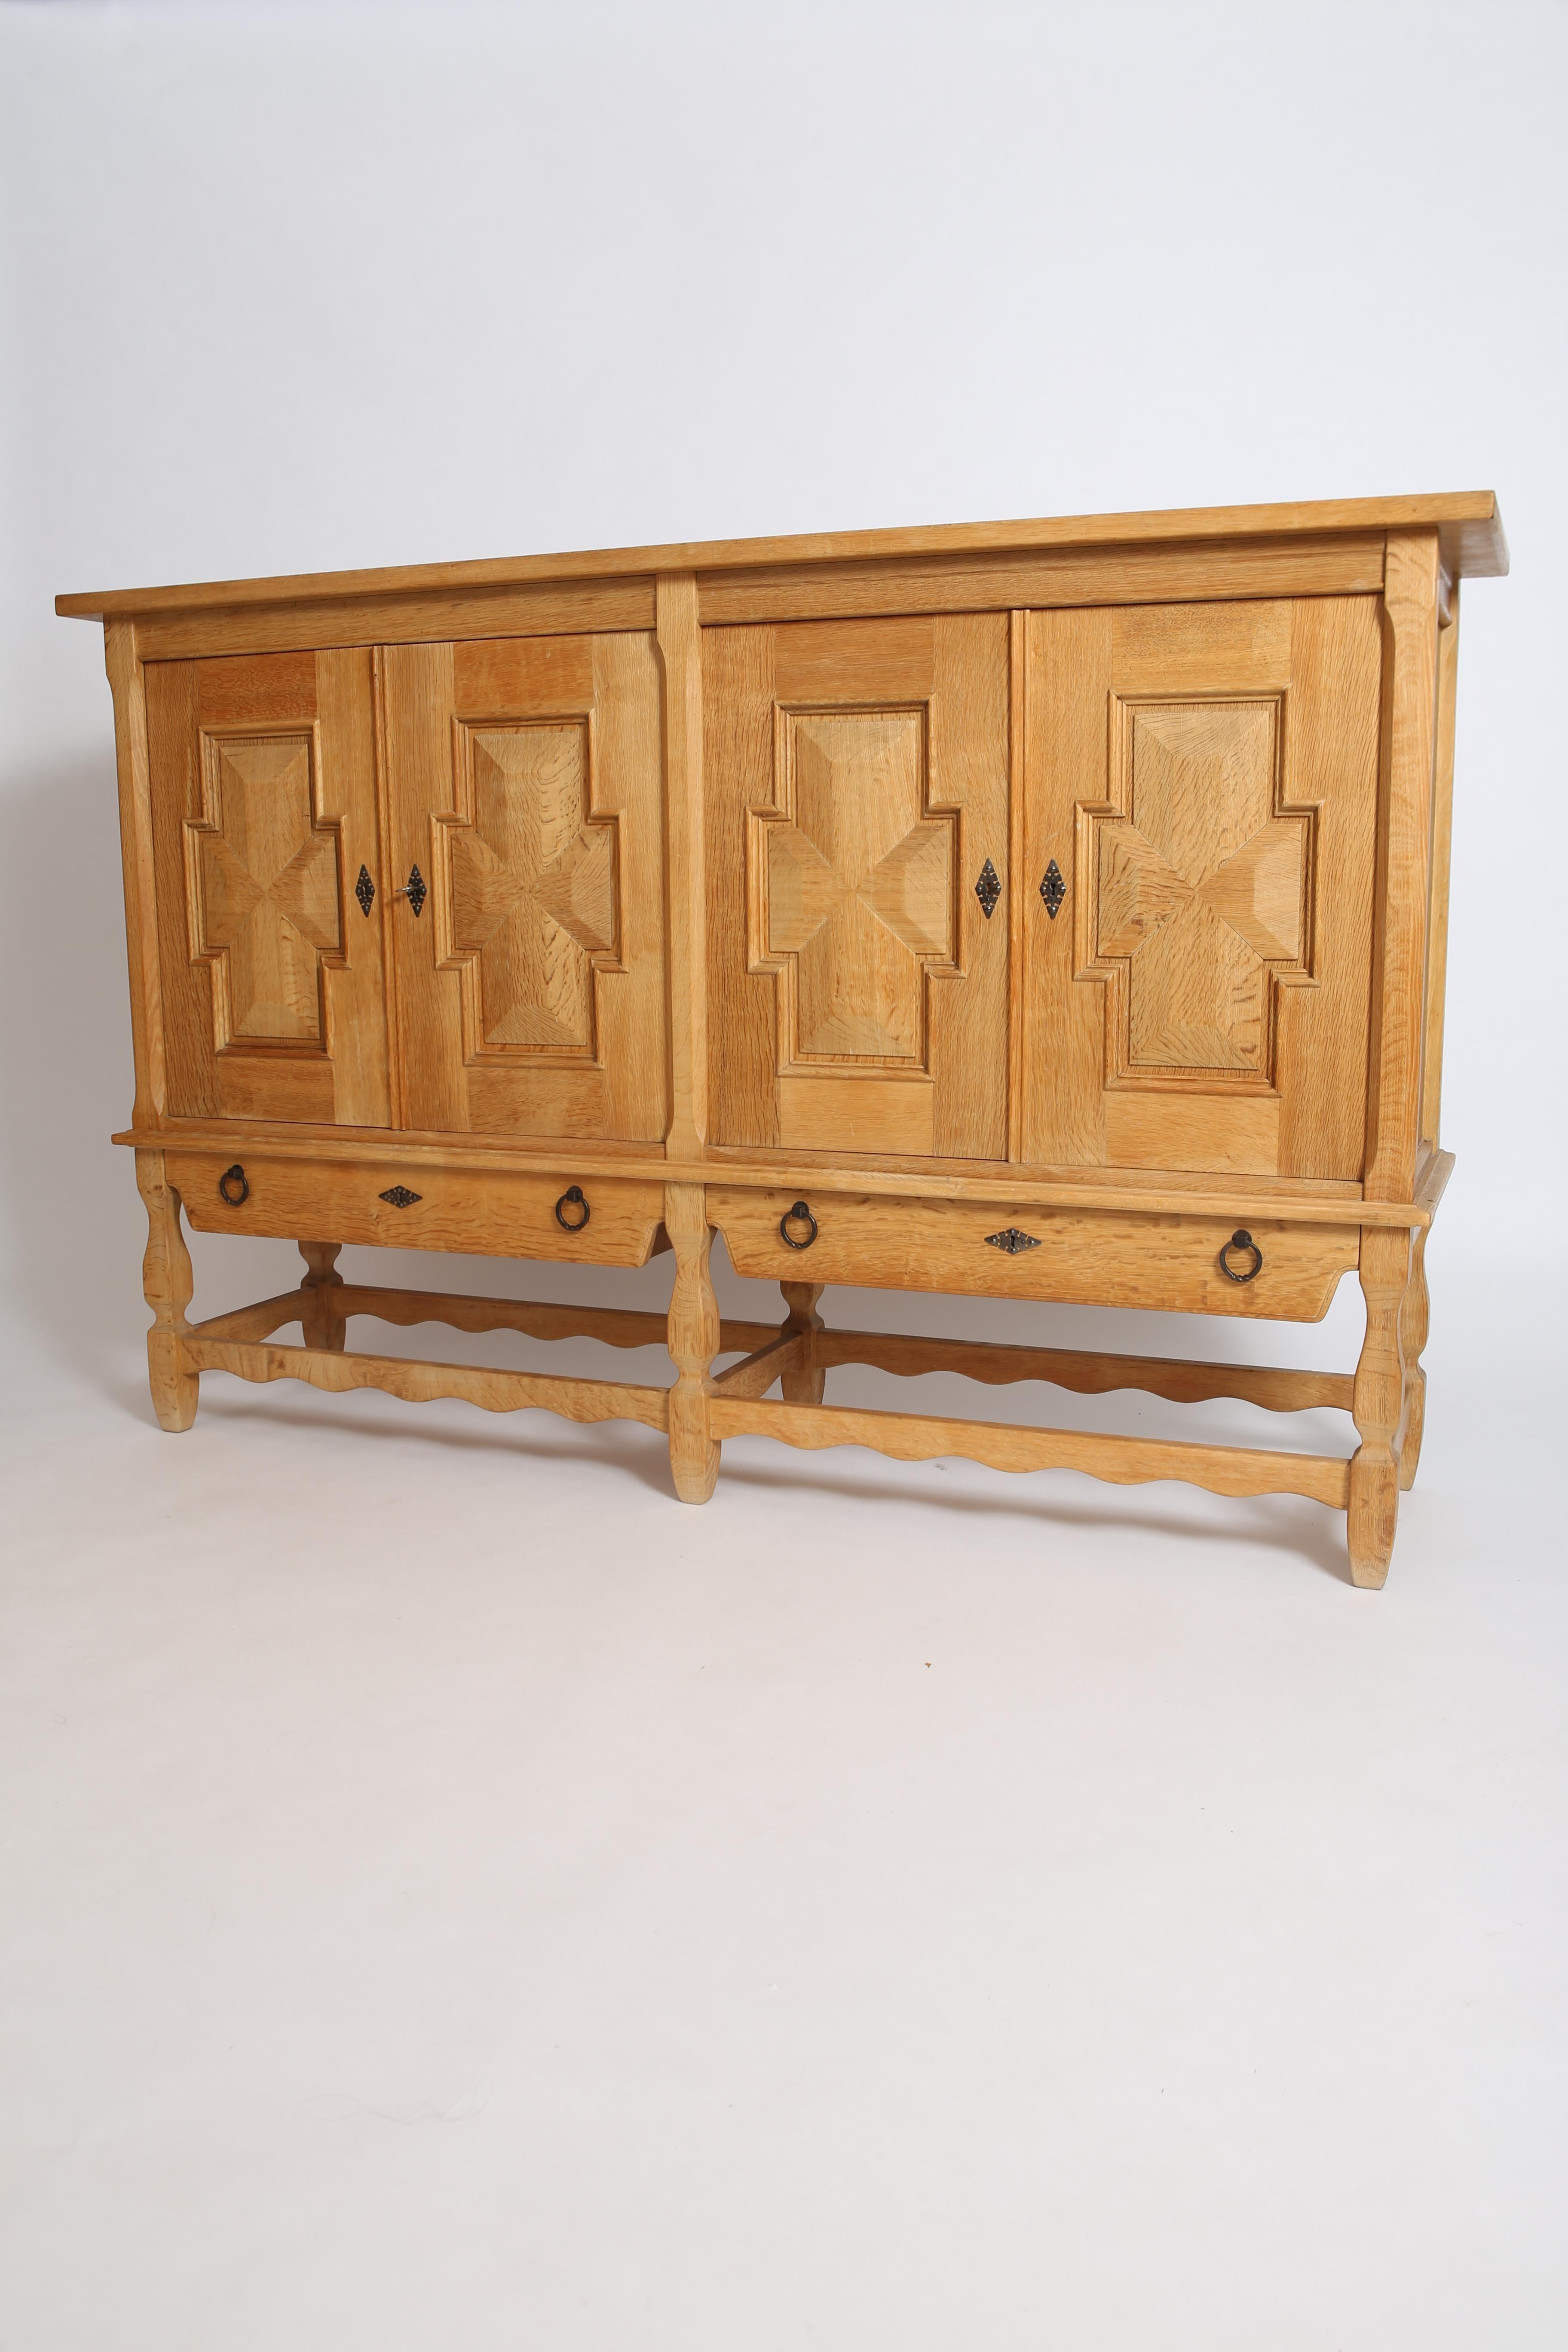 Grand sideboard in solid Oak by Henry (Henning) Kjaernulf. Denmark, circa 1960s. With beautifully ornate carved doors, turned oak legs, and whimsical detailing throughout, this is a statement piece. Patinated brass hardware. Original finish to the